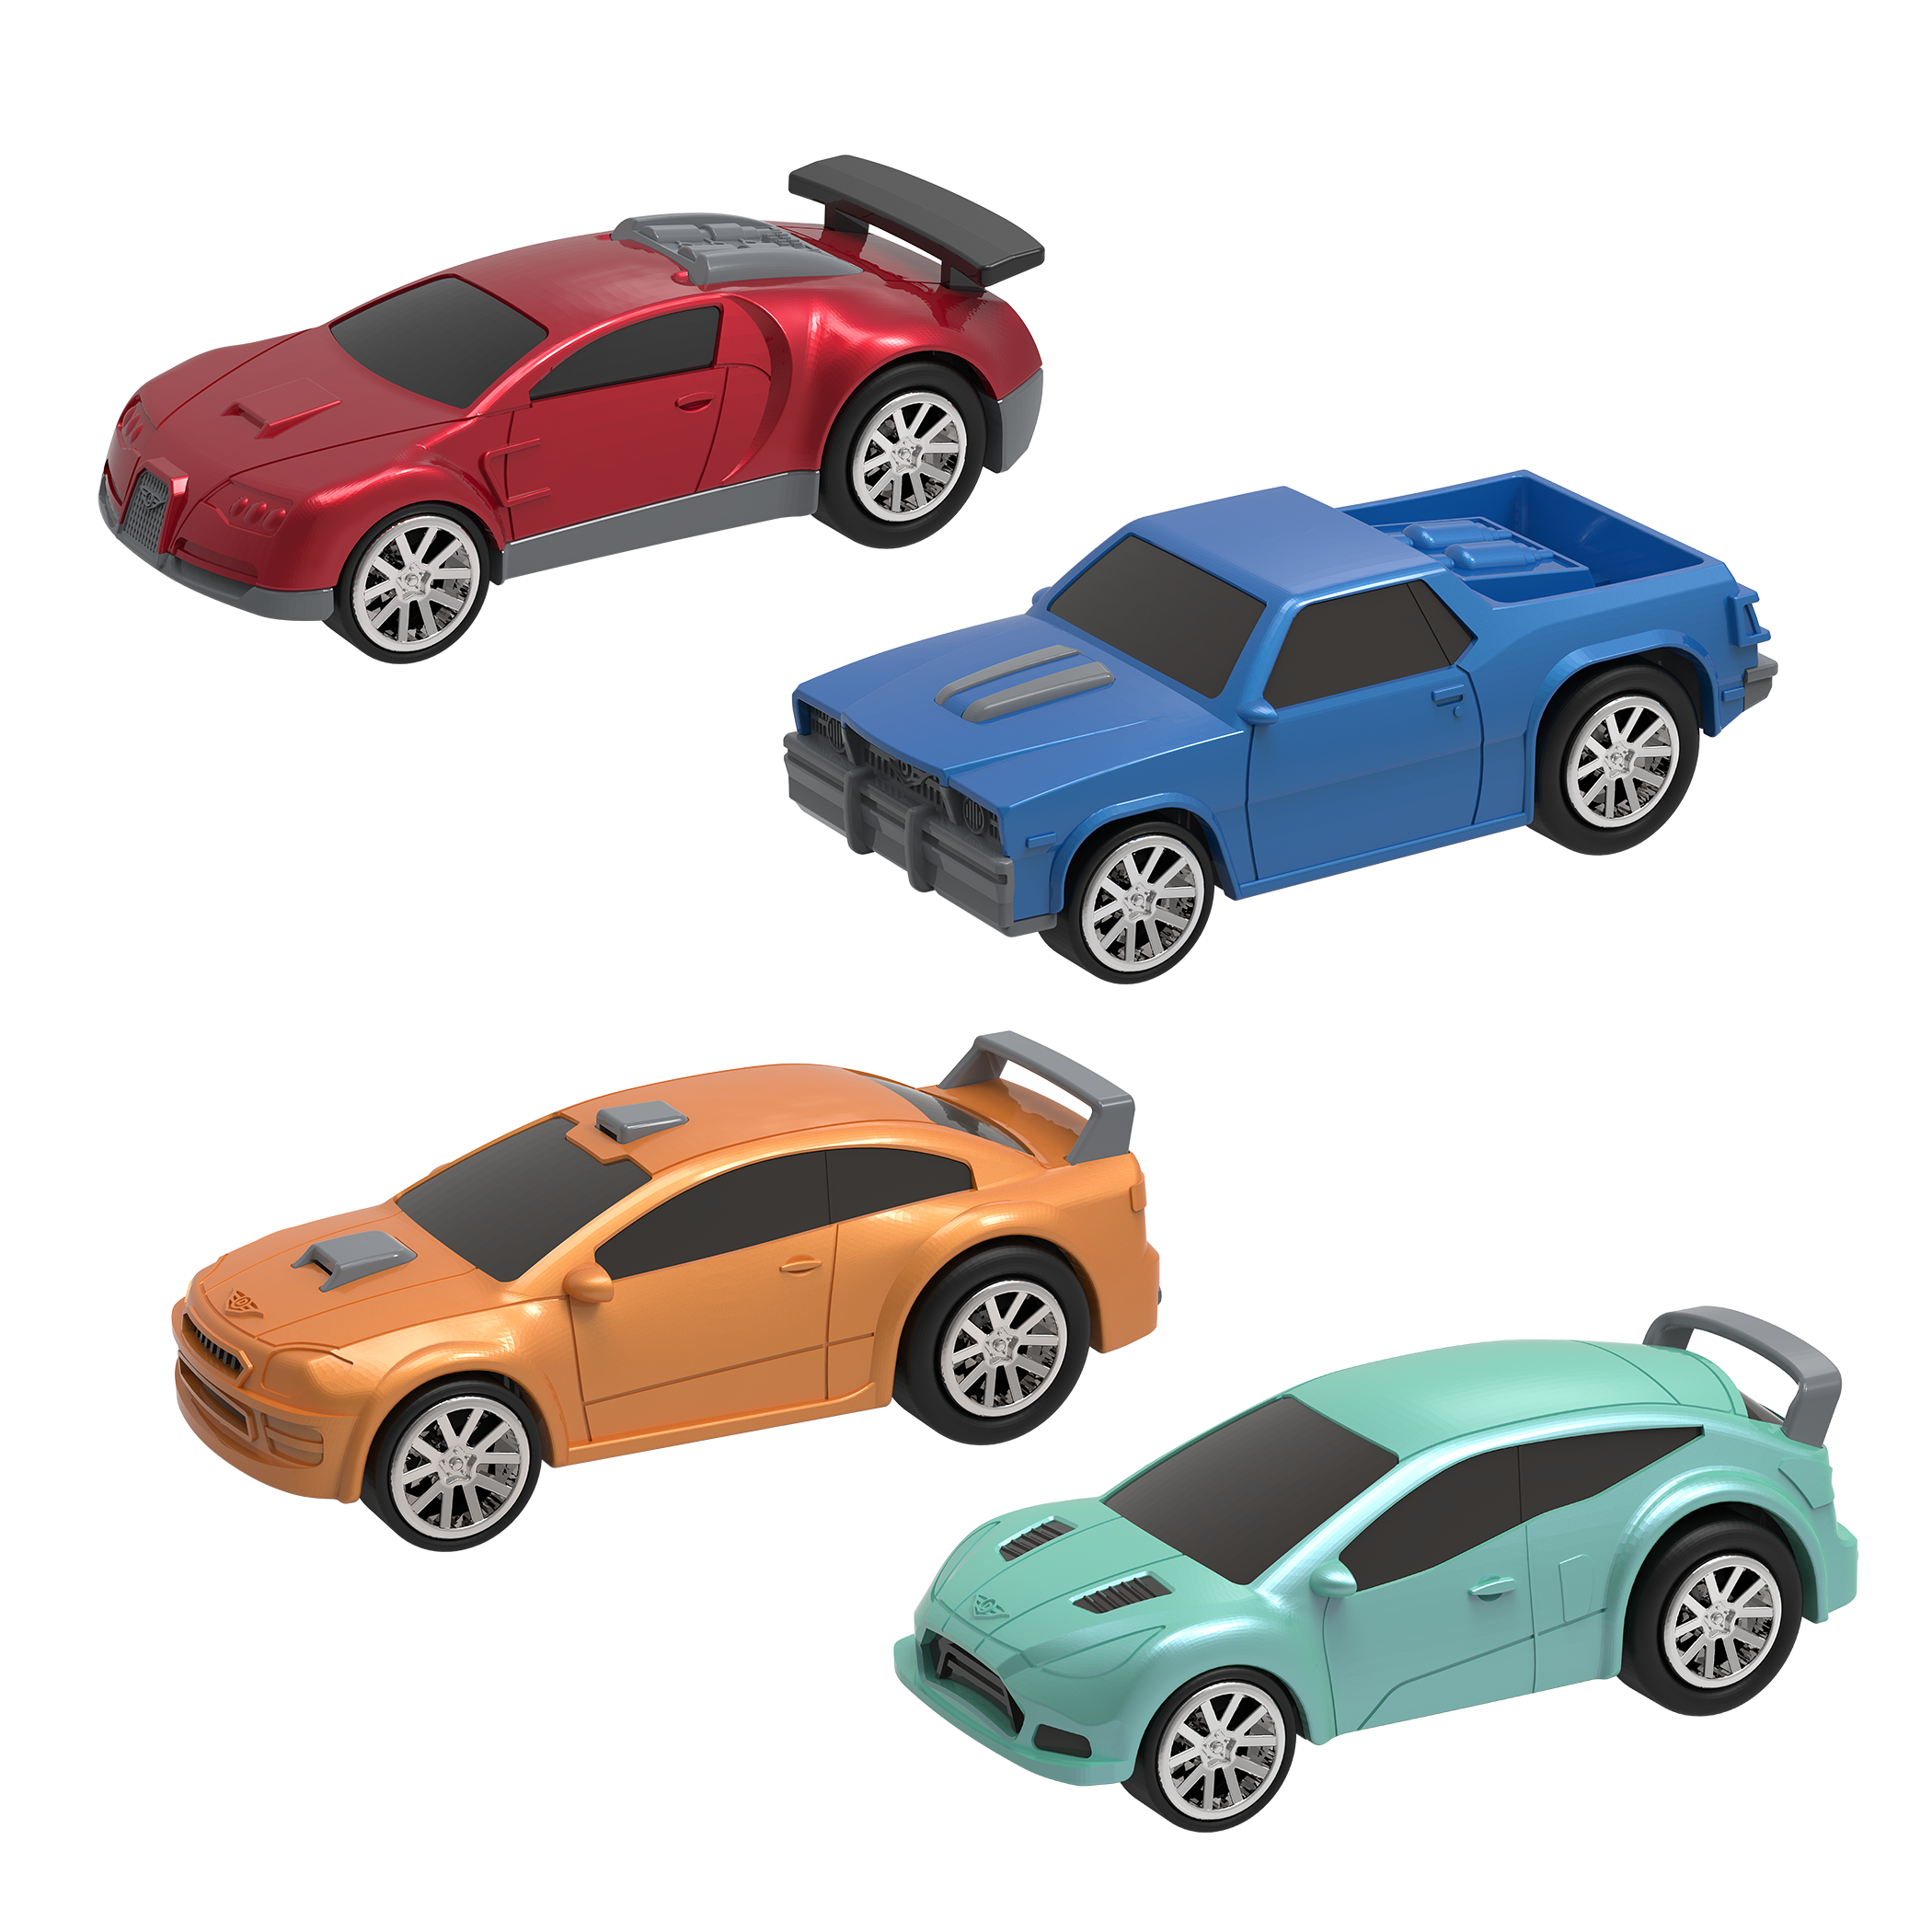 DRIVEN Turbocharge, Small Toy Pullback Cars (4 Pack)